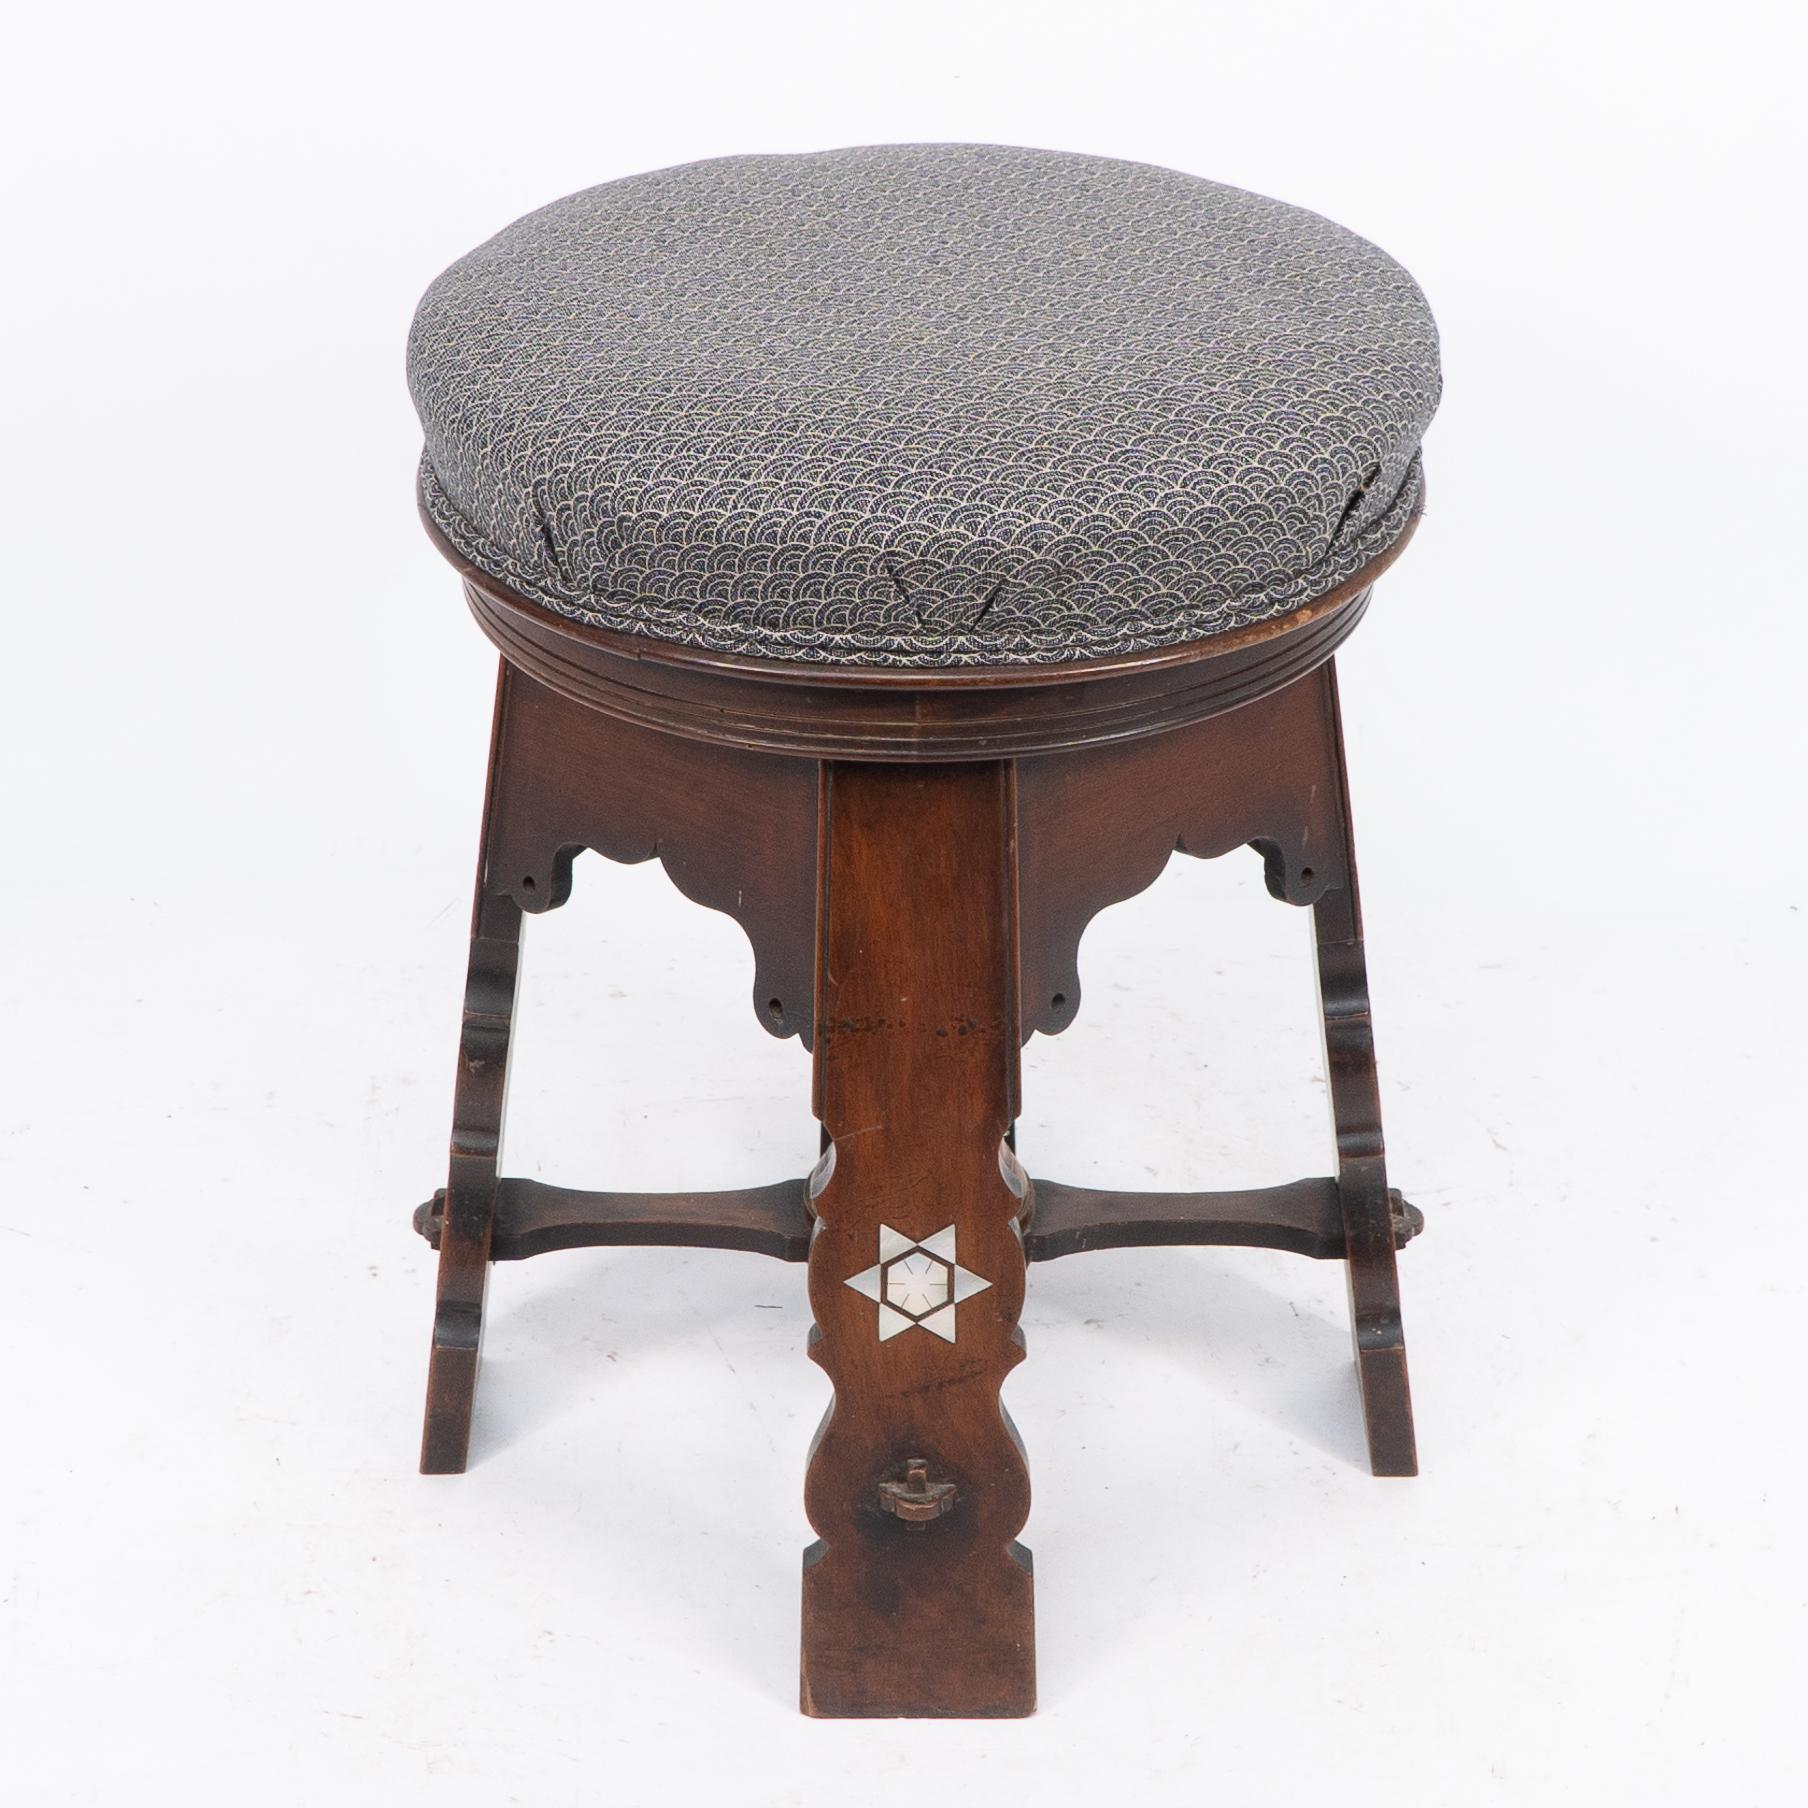 Liberty and Co (attributed). A rare Moorish walnut revolving stool with Moorish arches and mother-of-pearl star shaped inlay on the feet. We have had the seat professionally reupholstered in a quality blue fabric.
